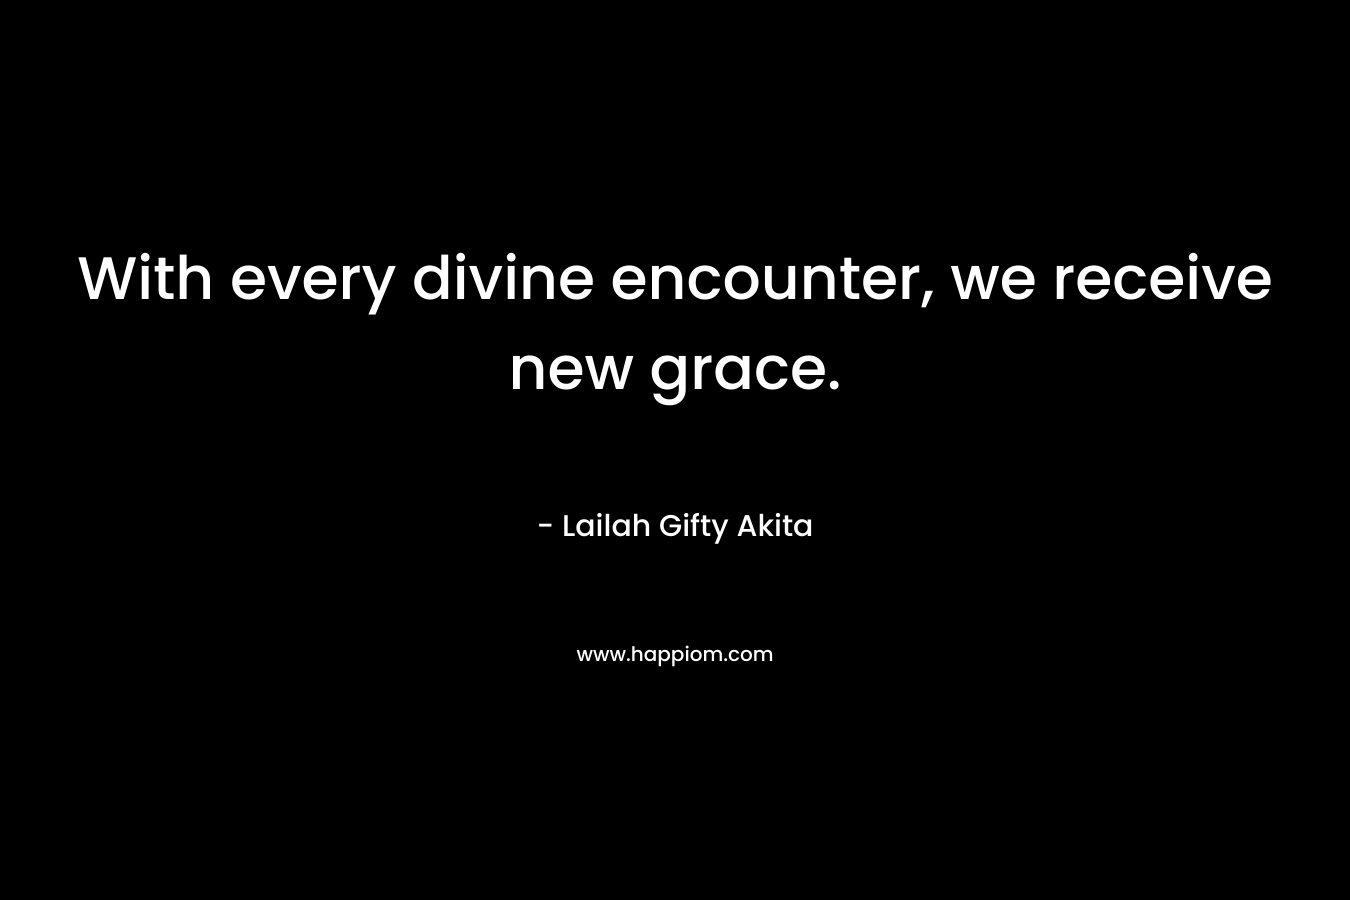 With every divine encounter, we receive new grace.